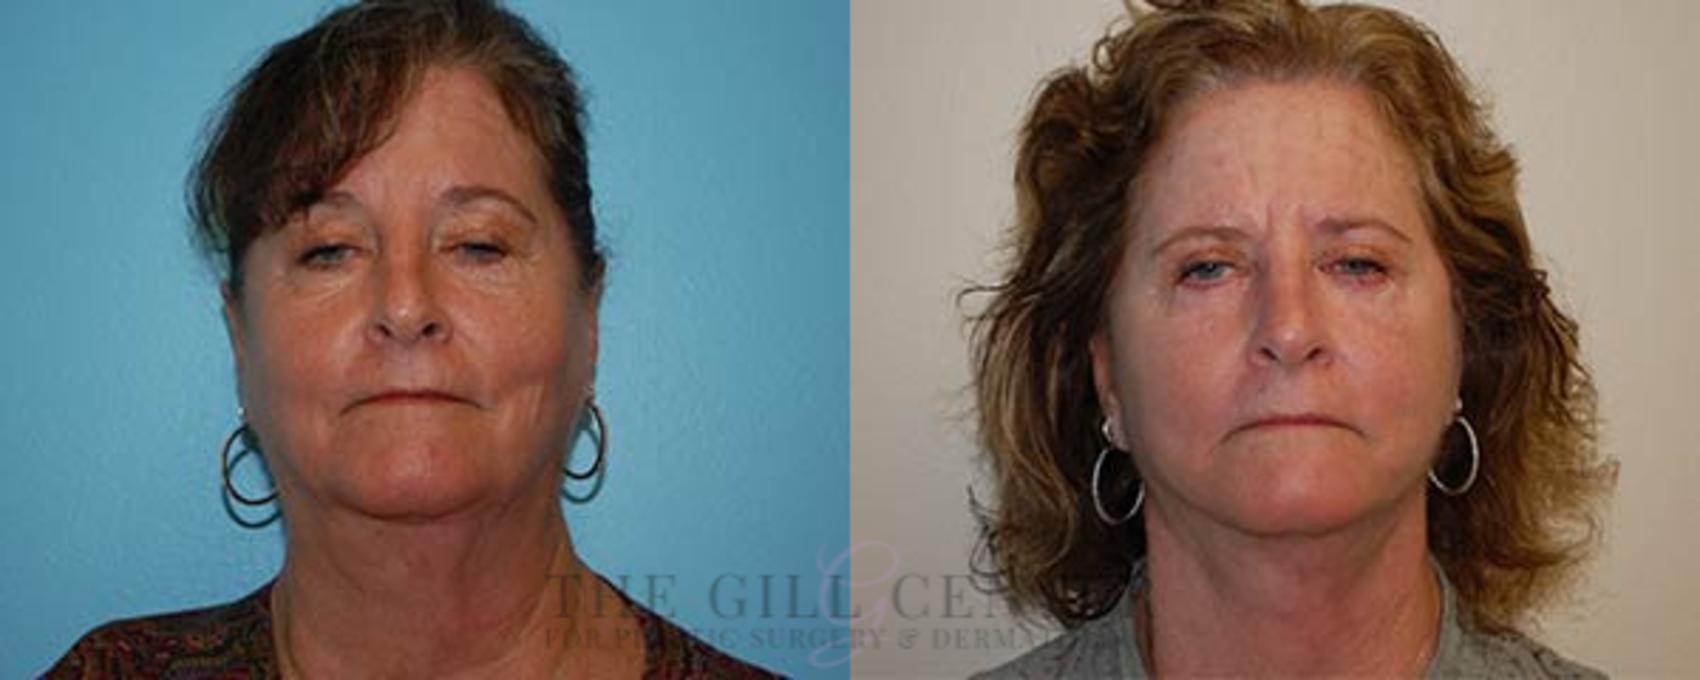 Face & Neck Lift Case 415 Before & After Front | The Woodlands, TX | The Gill Center for Plastic Surgery and Dermatology